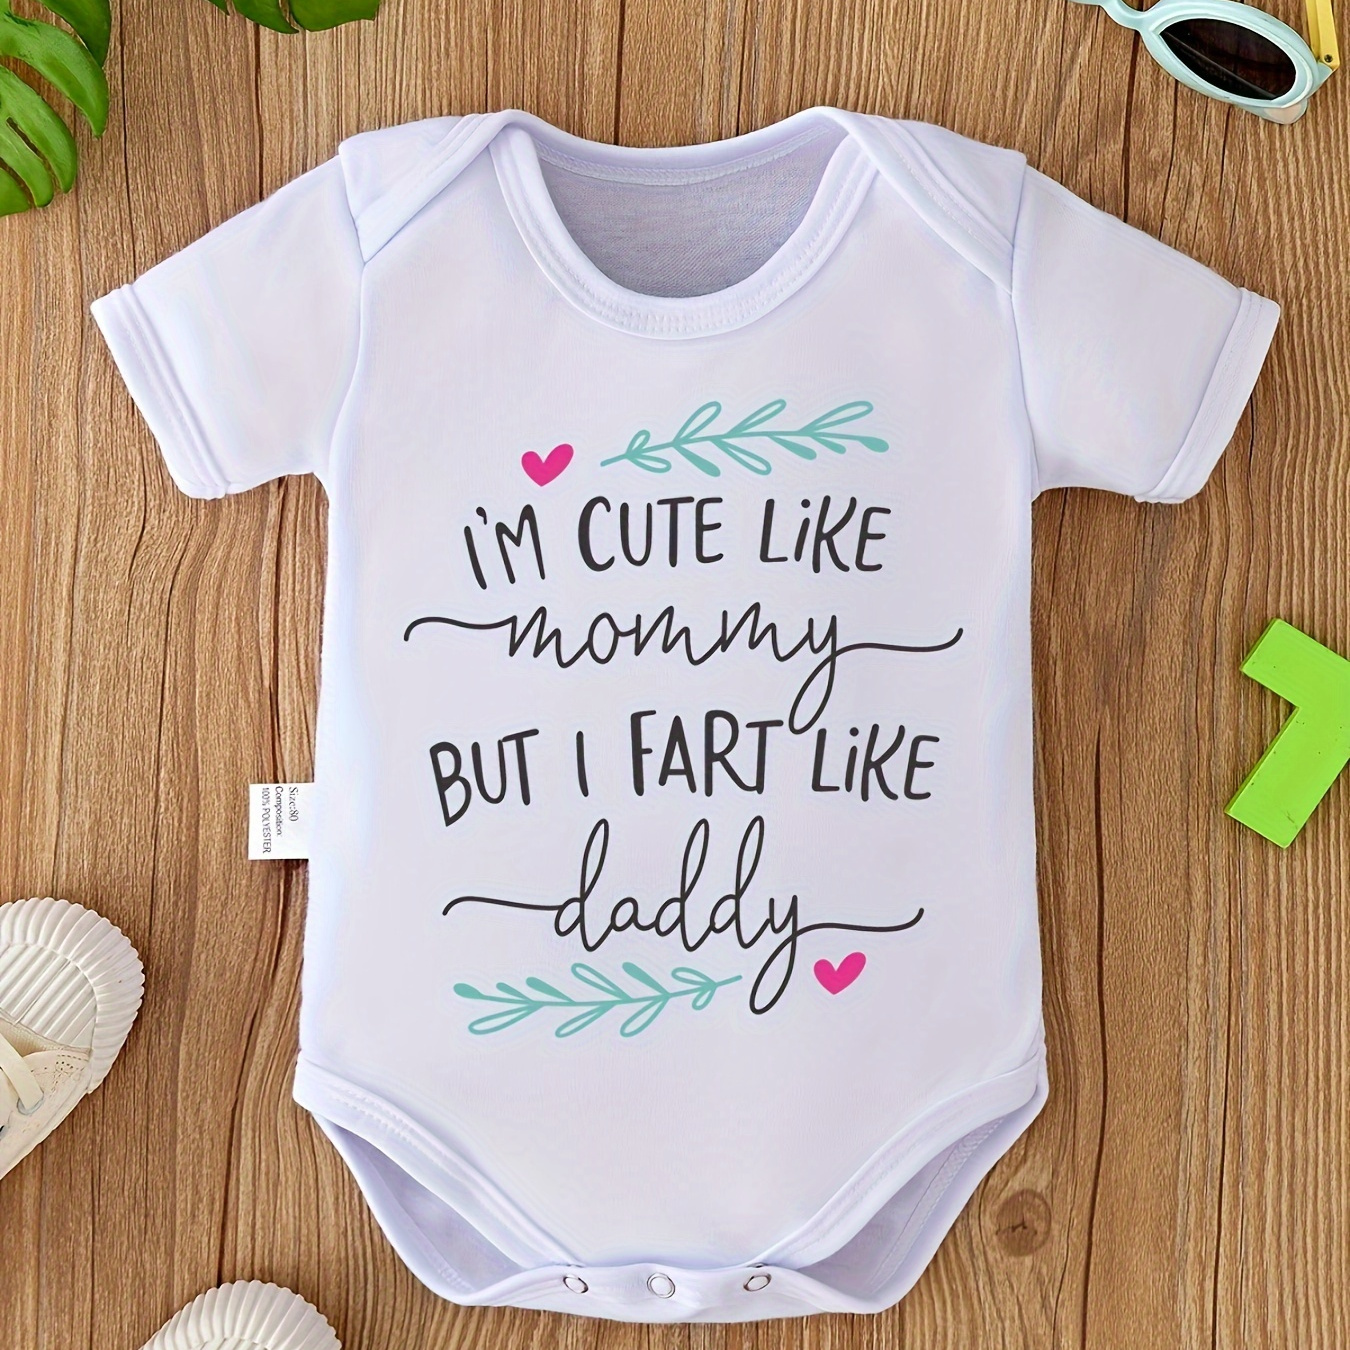 

" I'm Cute Like Mommy But I Fart Like Daddy " Funny Letter Printed Baby Girls Triangle Romper Newborn Romper Onesie Soft And Comfortable Pregnancy Gift